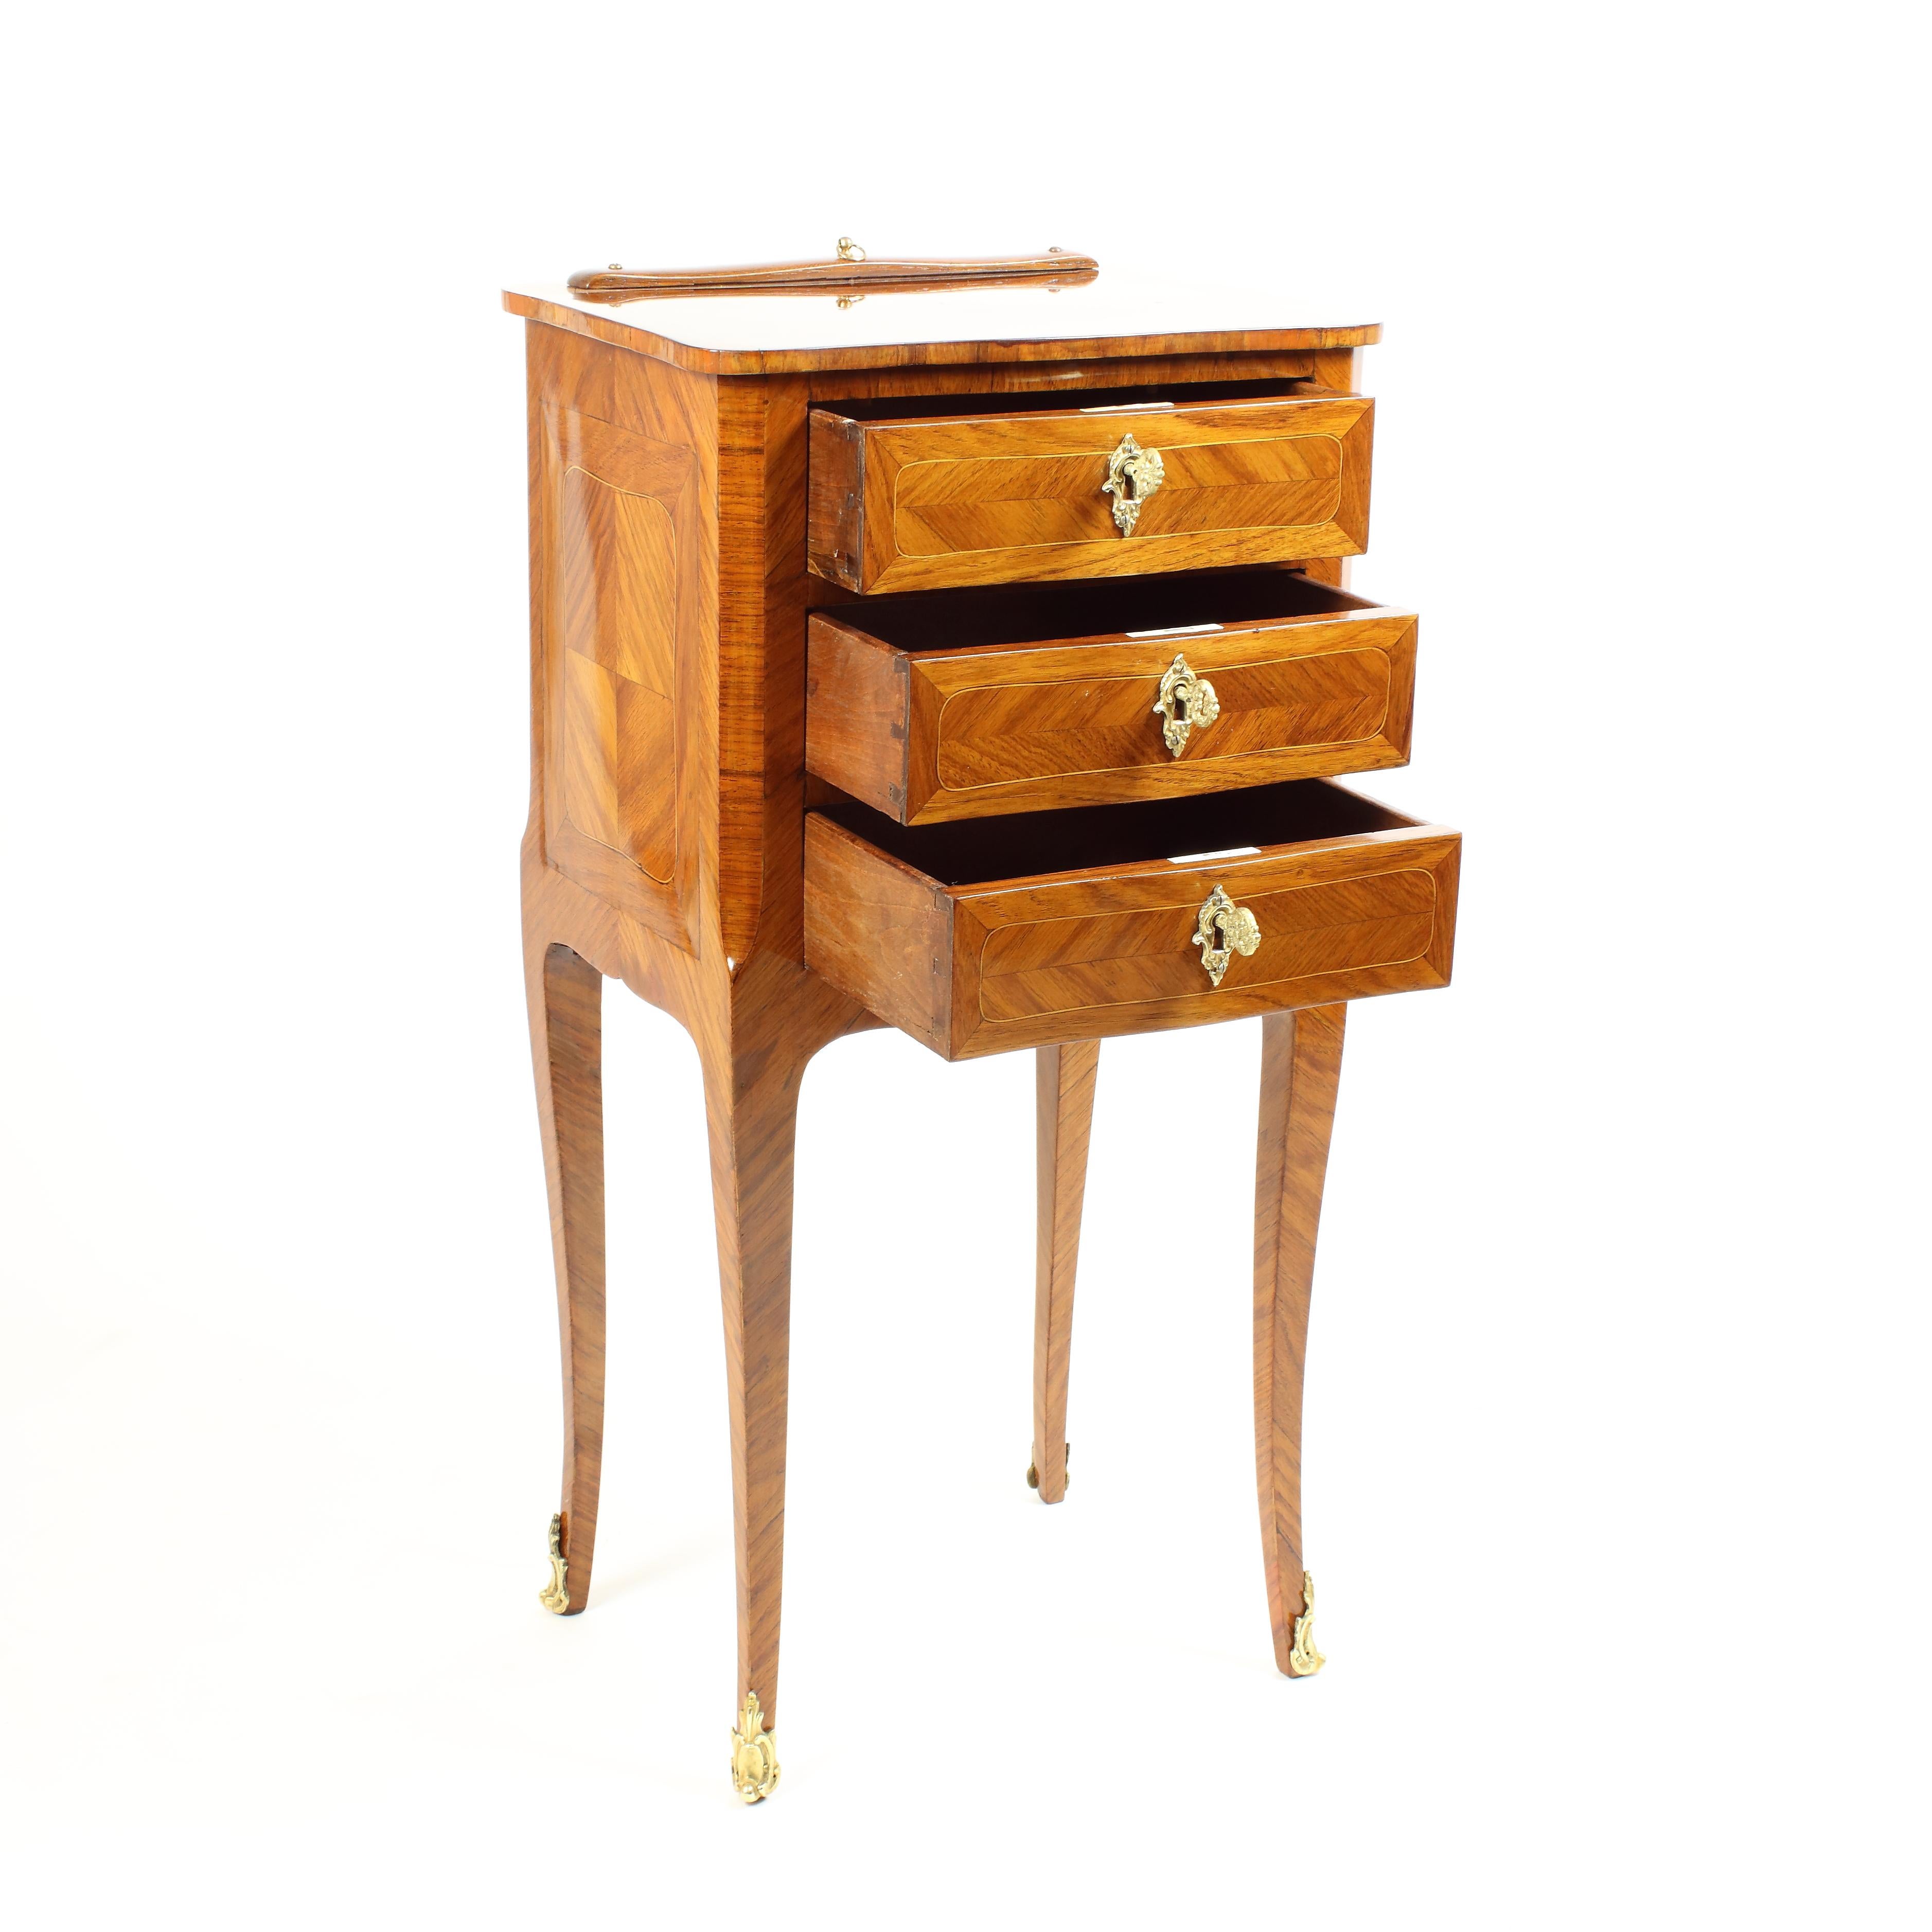 French 18th century Louis XV small Marquetry side table, a so-called 